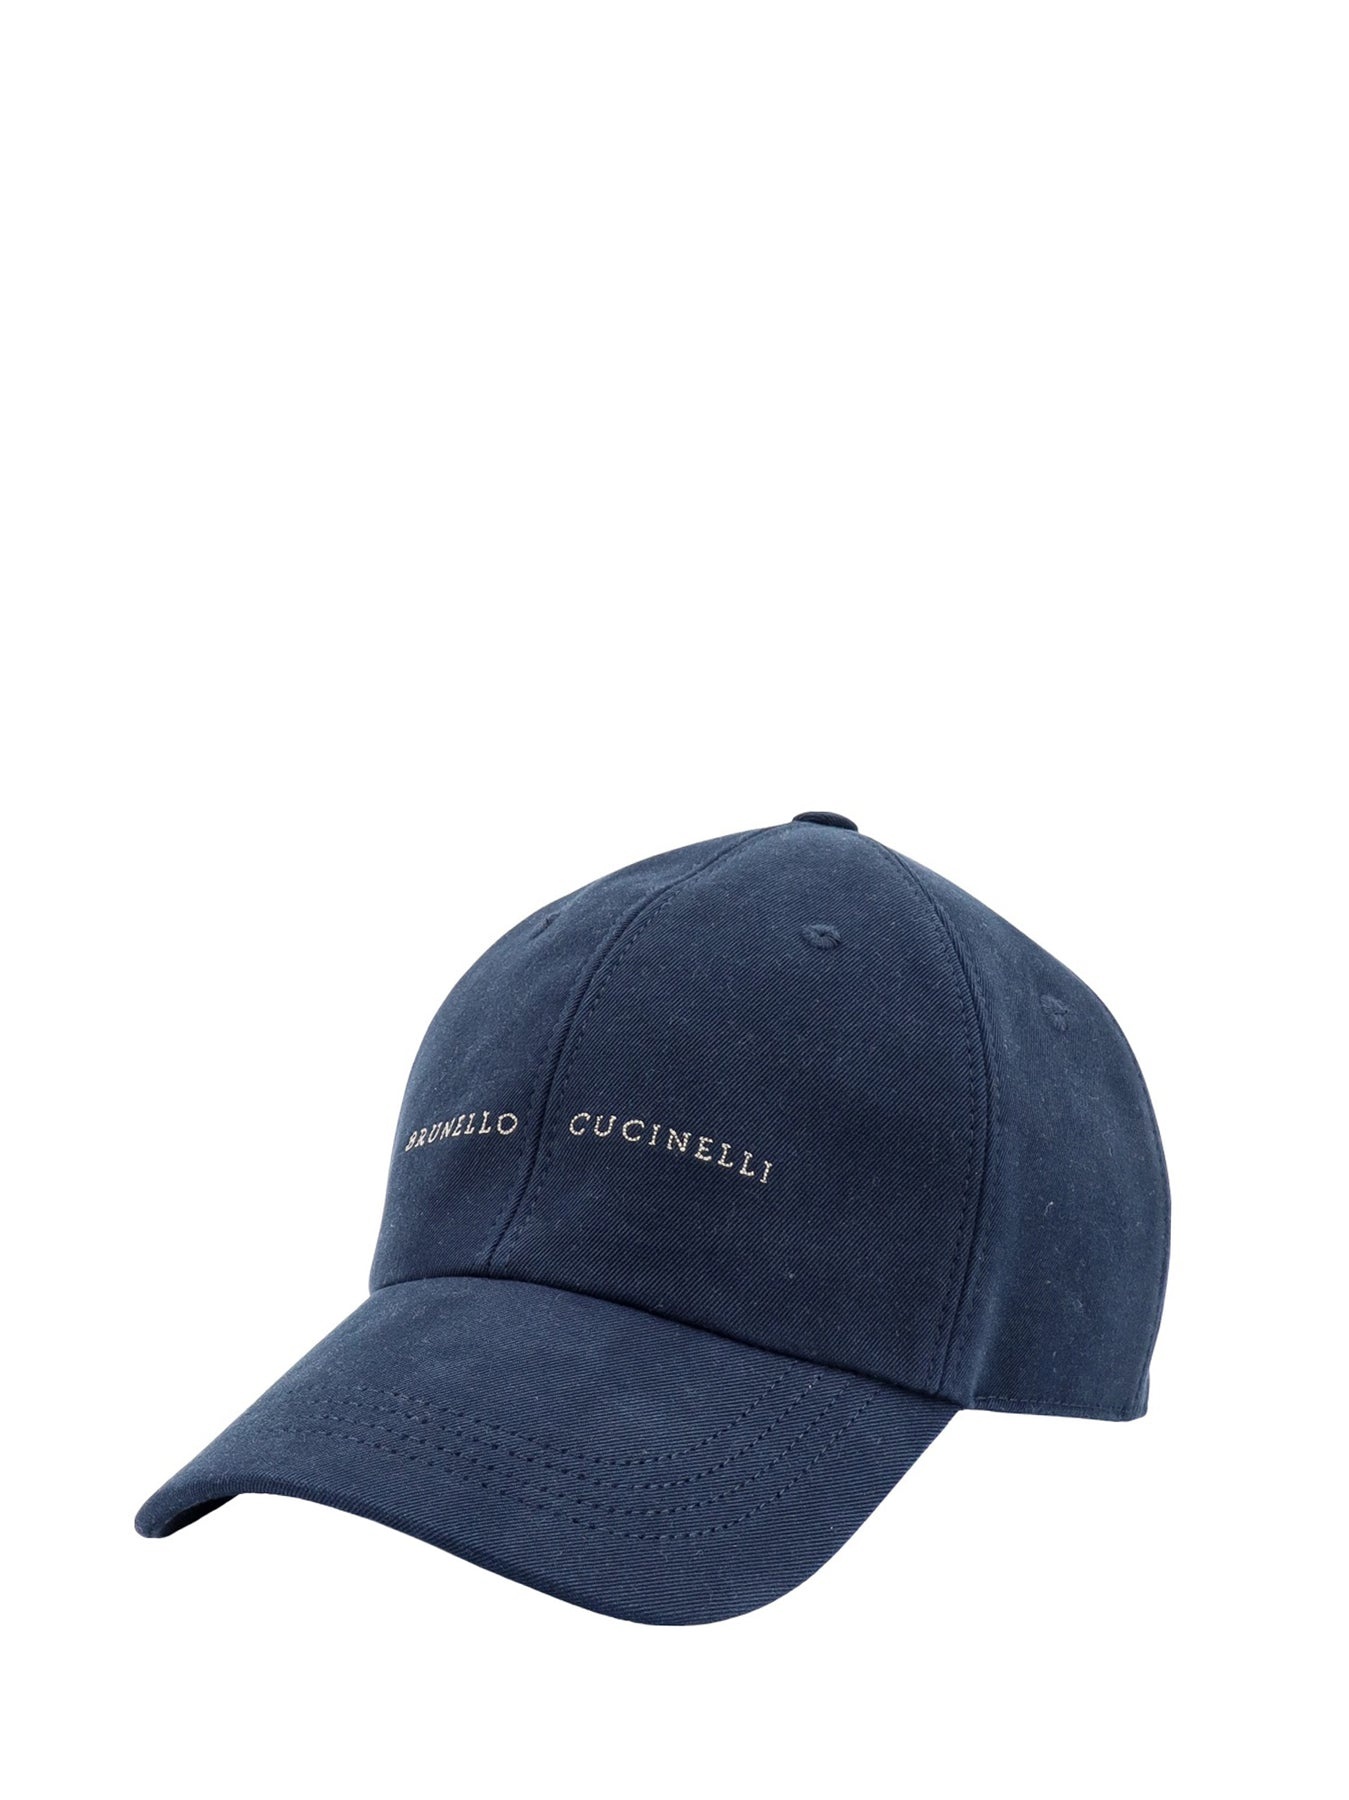 Cotton hat with embroidered logo - 2